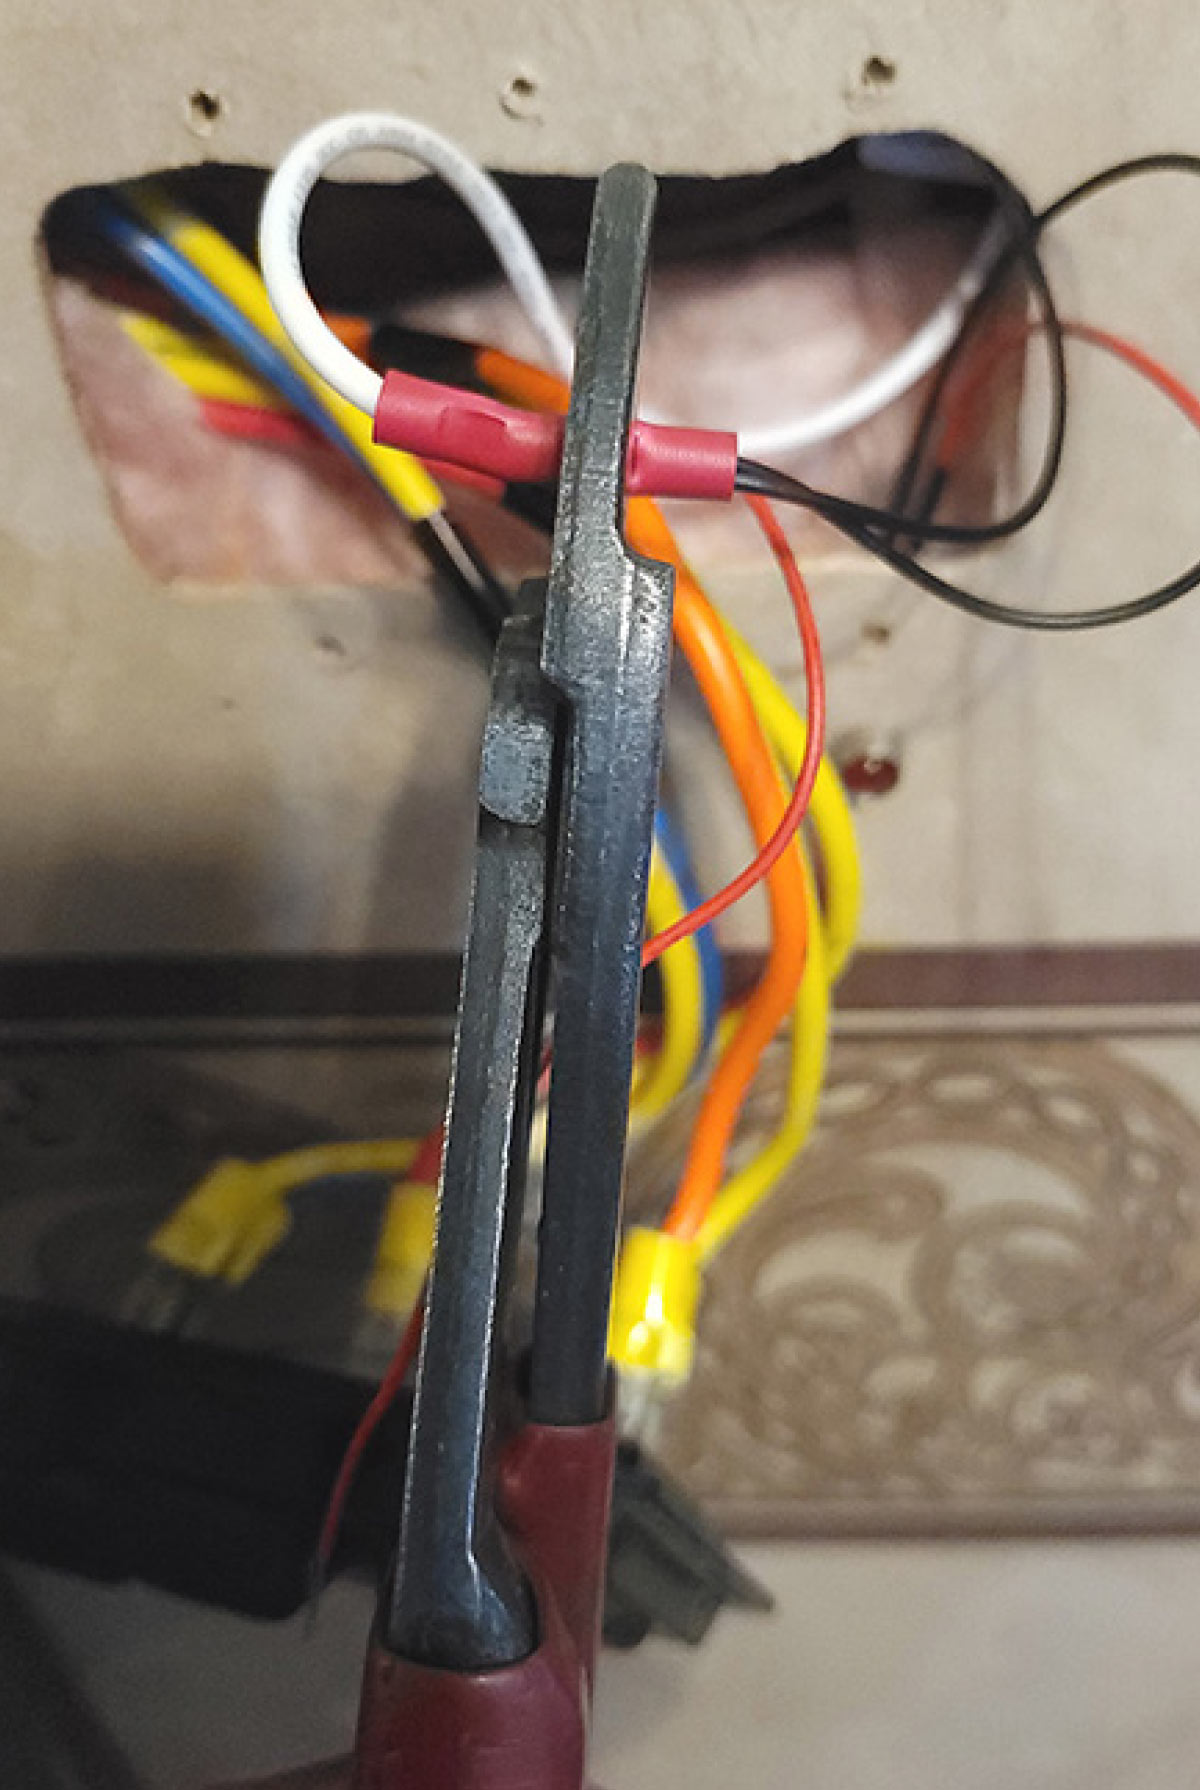 Ground wires were butt-connected to the leads attached